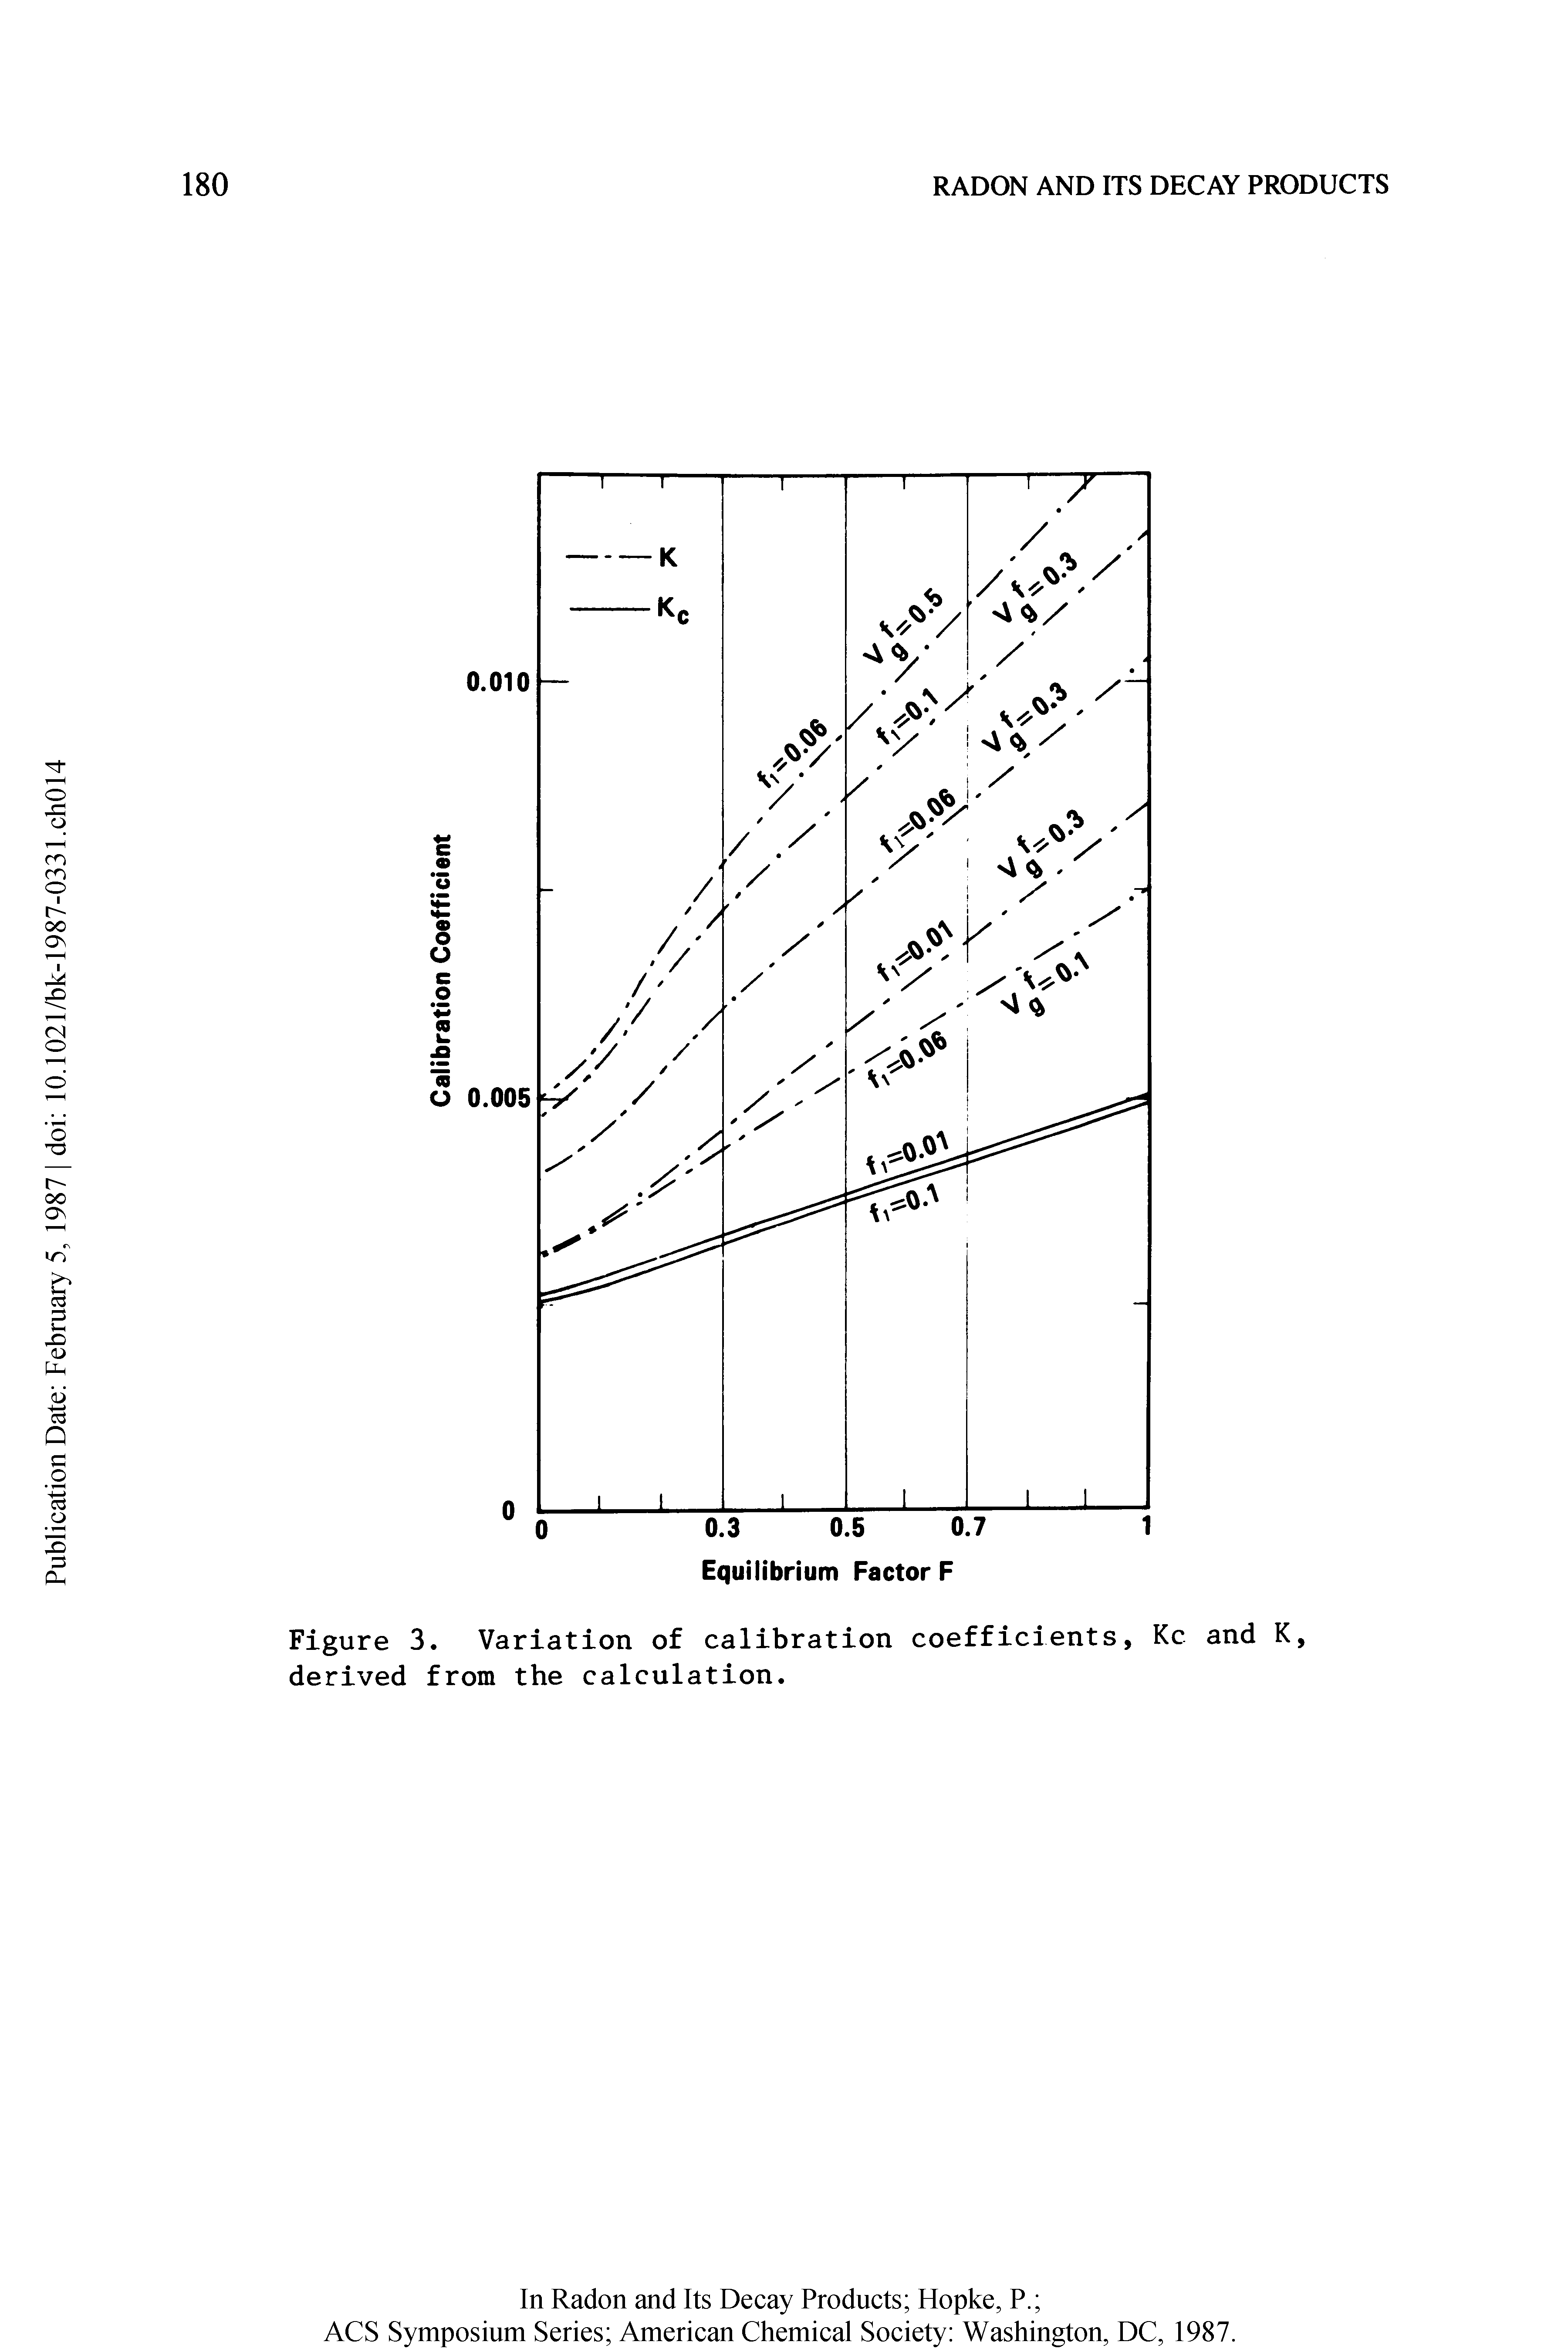 Figure 3. Variation of calibration coefficients, Kc and K, derived from the calculation.